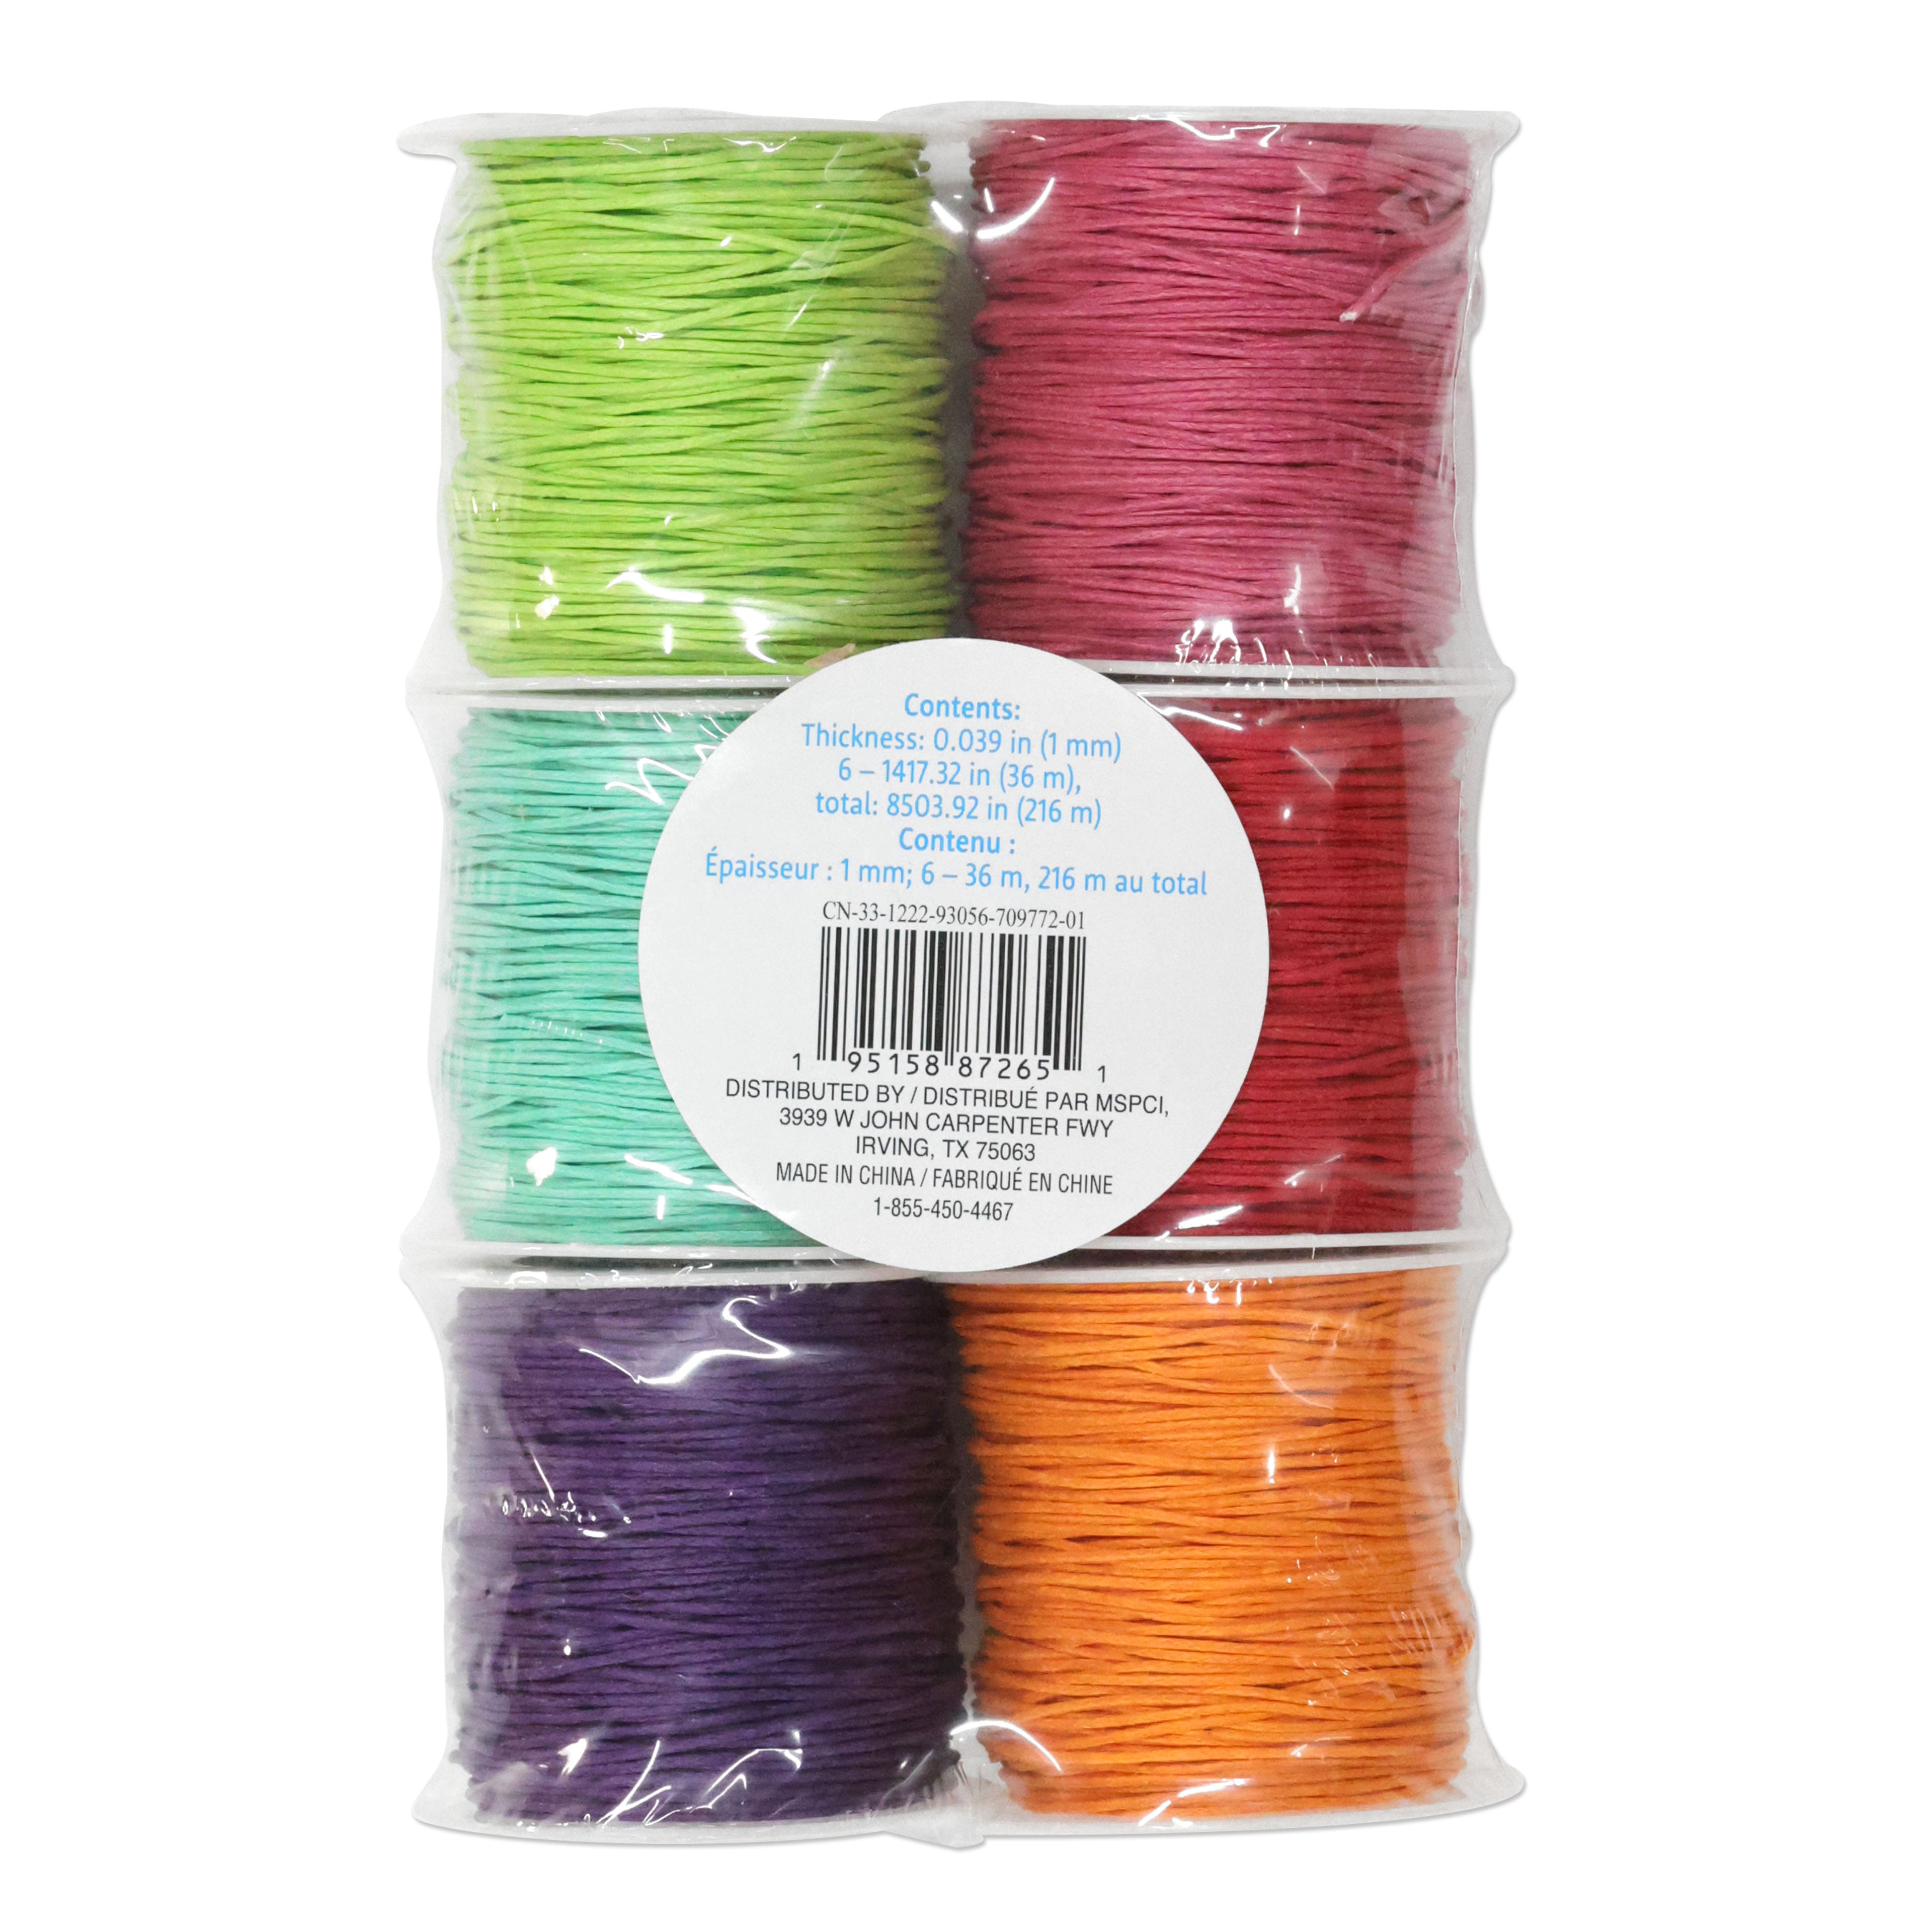 12 Packs: 6 ct. (72 total) 1mm Brights Waxed Cording Pack by Creatology&#x2122;